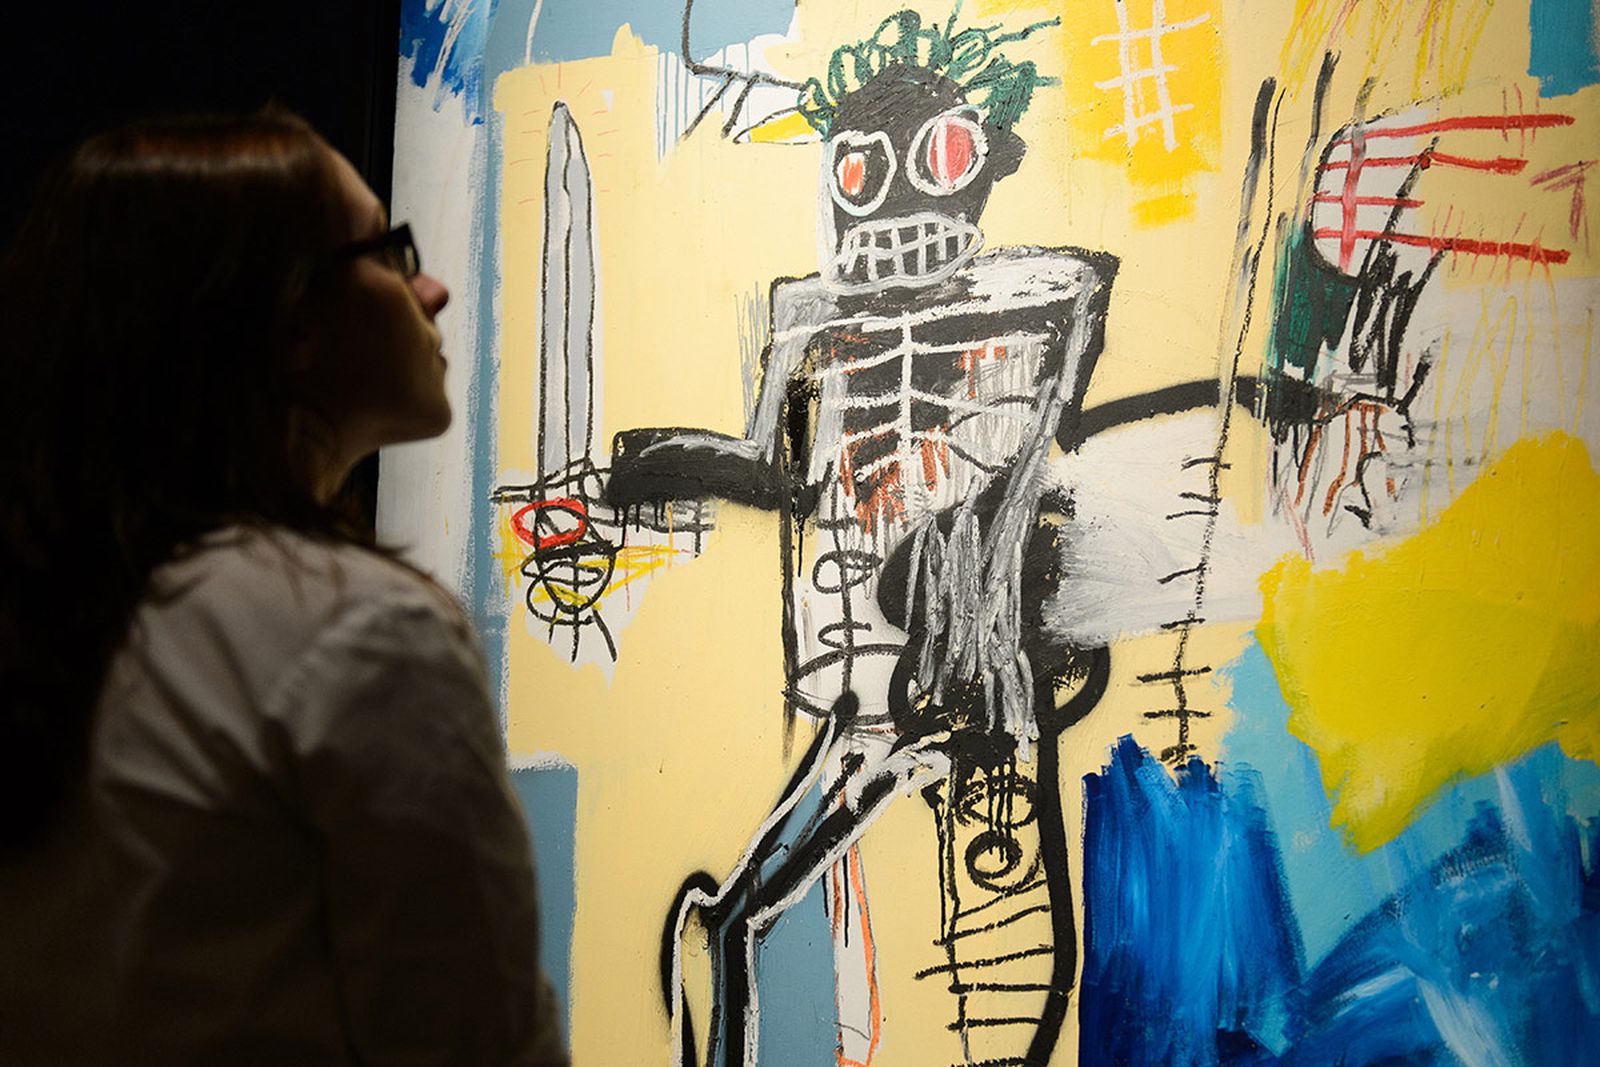 basquiats-31m-warrior-poised-to-become-the-expensive-western-work-auctioned-in-asia-main